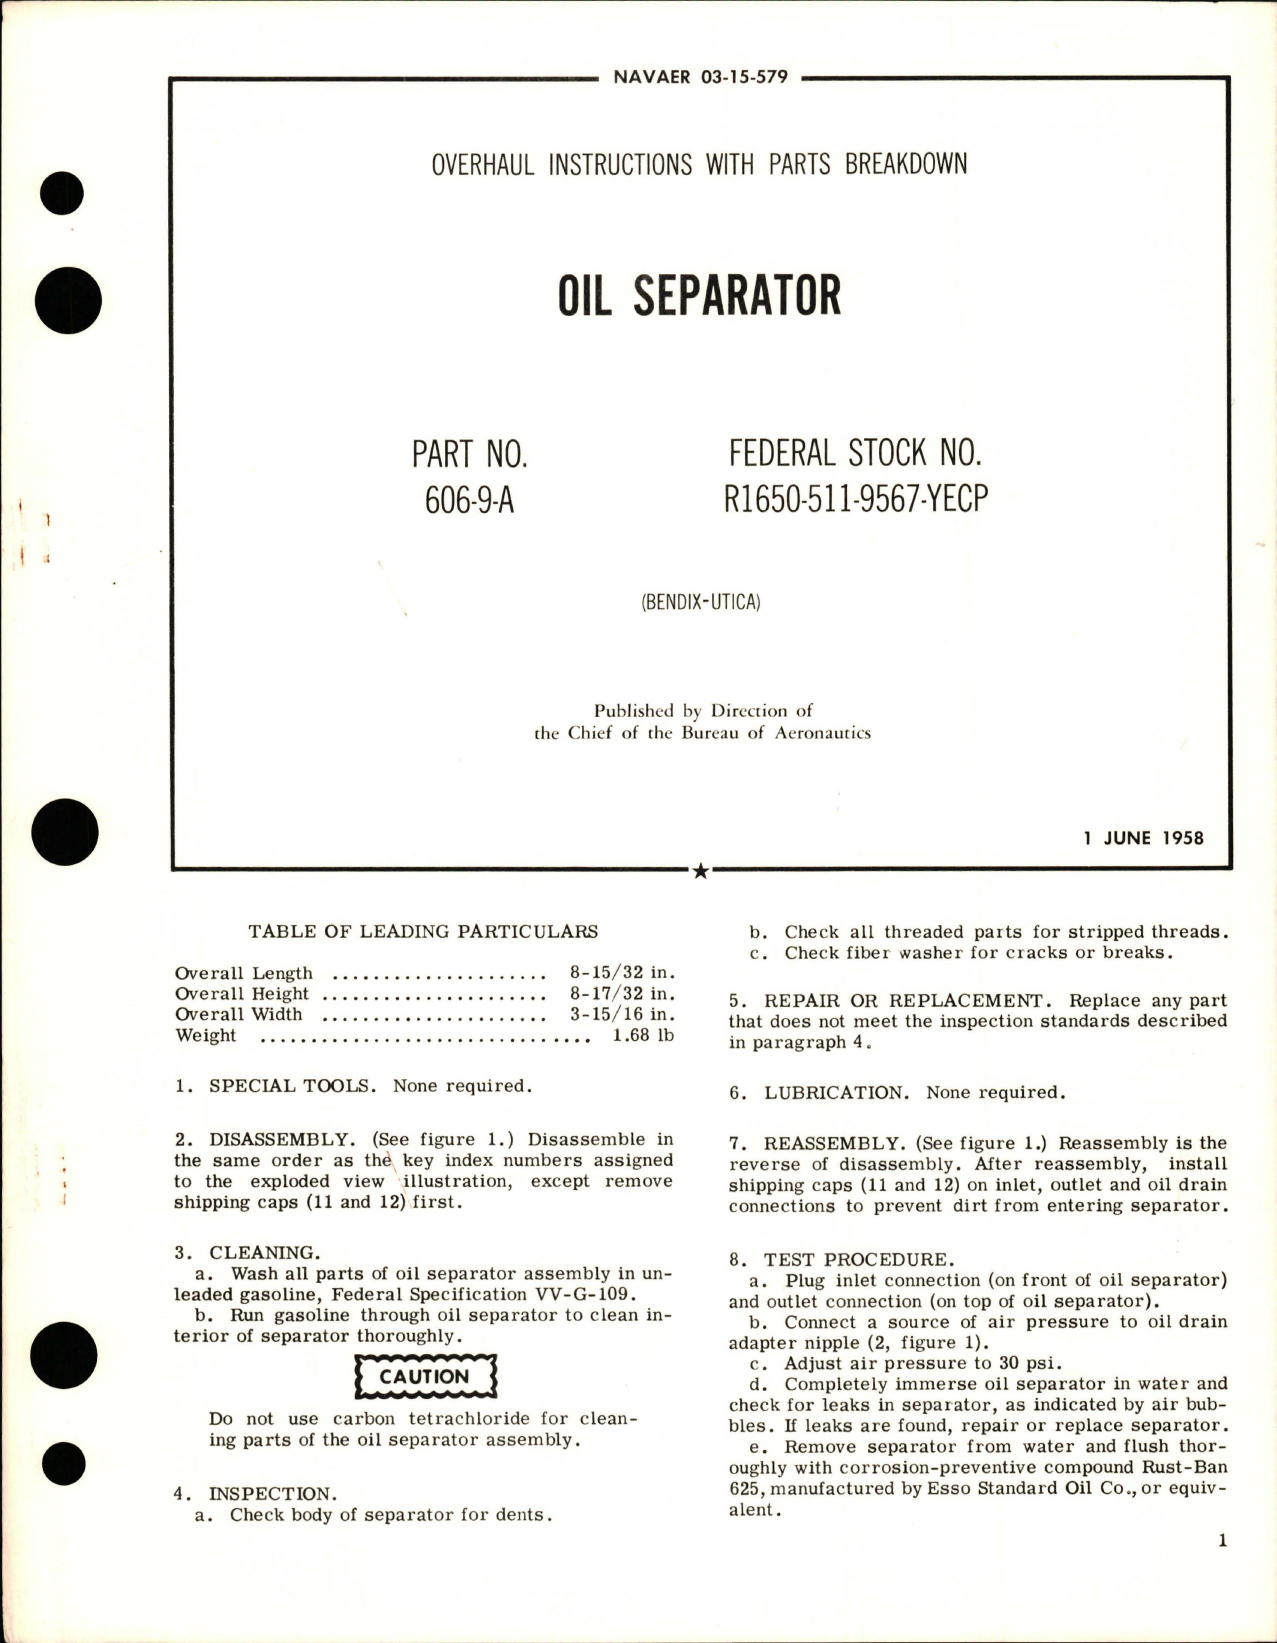 Sample page 1 from AirCorps Library document: Overhaul Instructions with Parts Breakdown for Oil Separator, Part 606-9-A